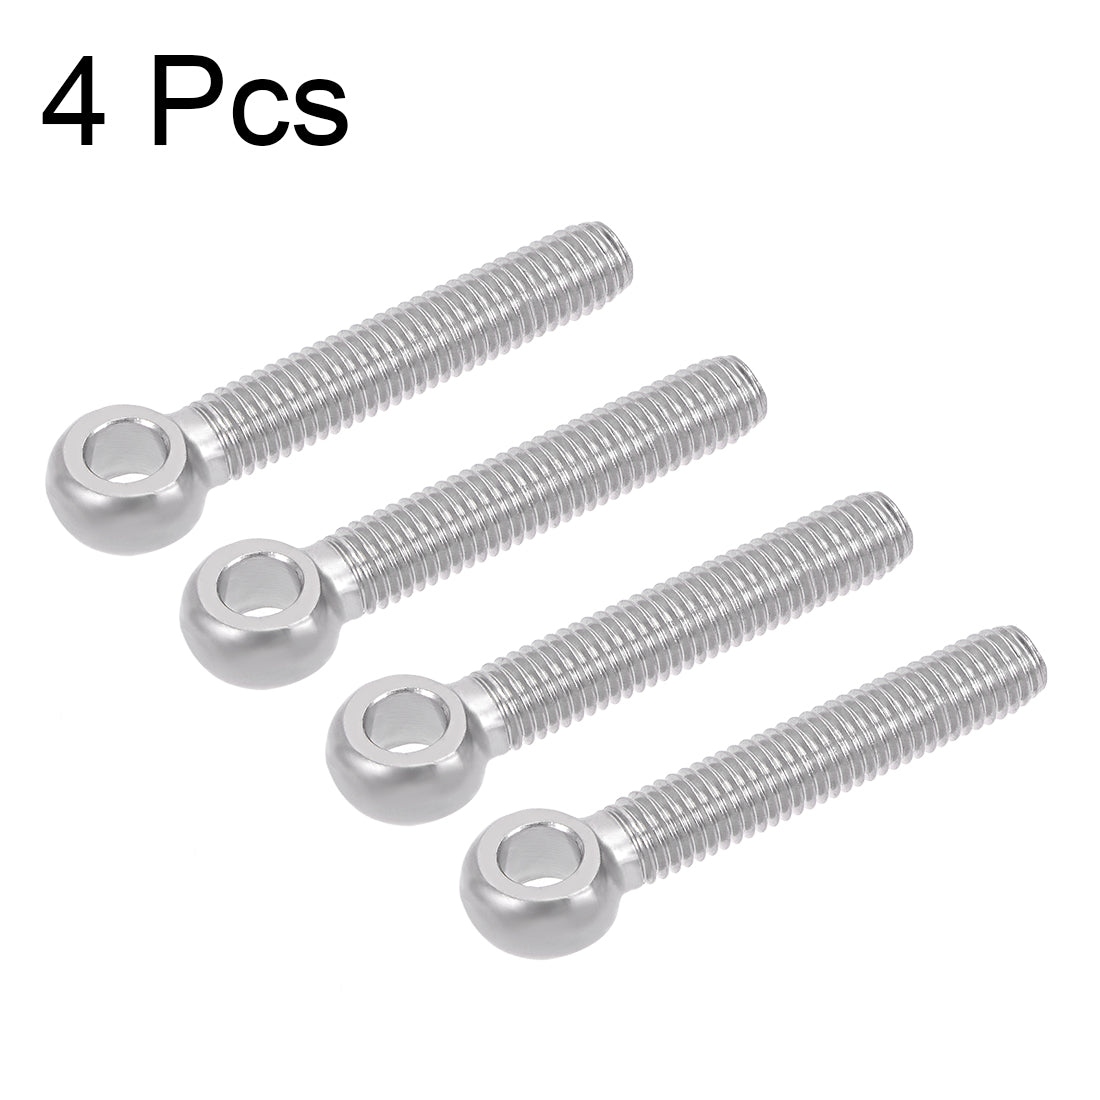 Uxcell Uxcell M5 x 25mm 304 Stainless Steel Machine Shoulder Lift Eye Bolt Rigging 4pcs